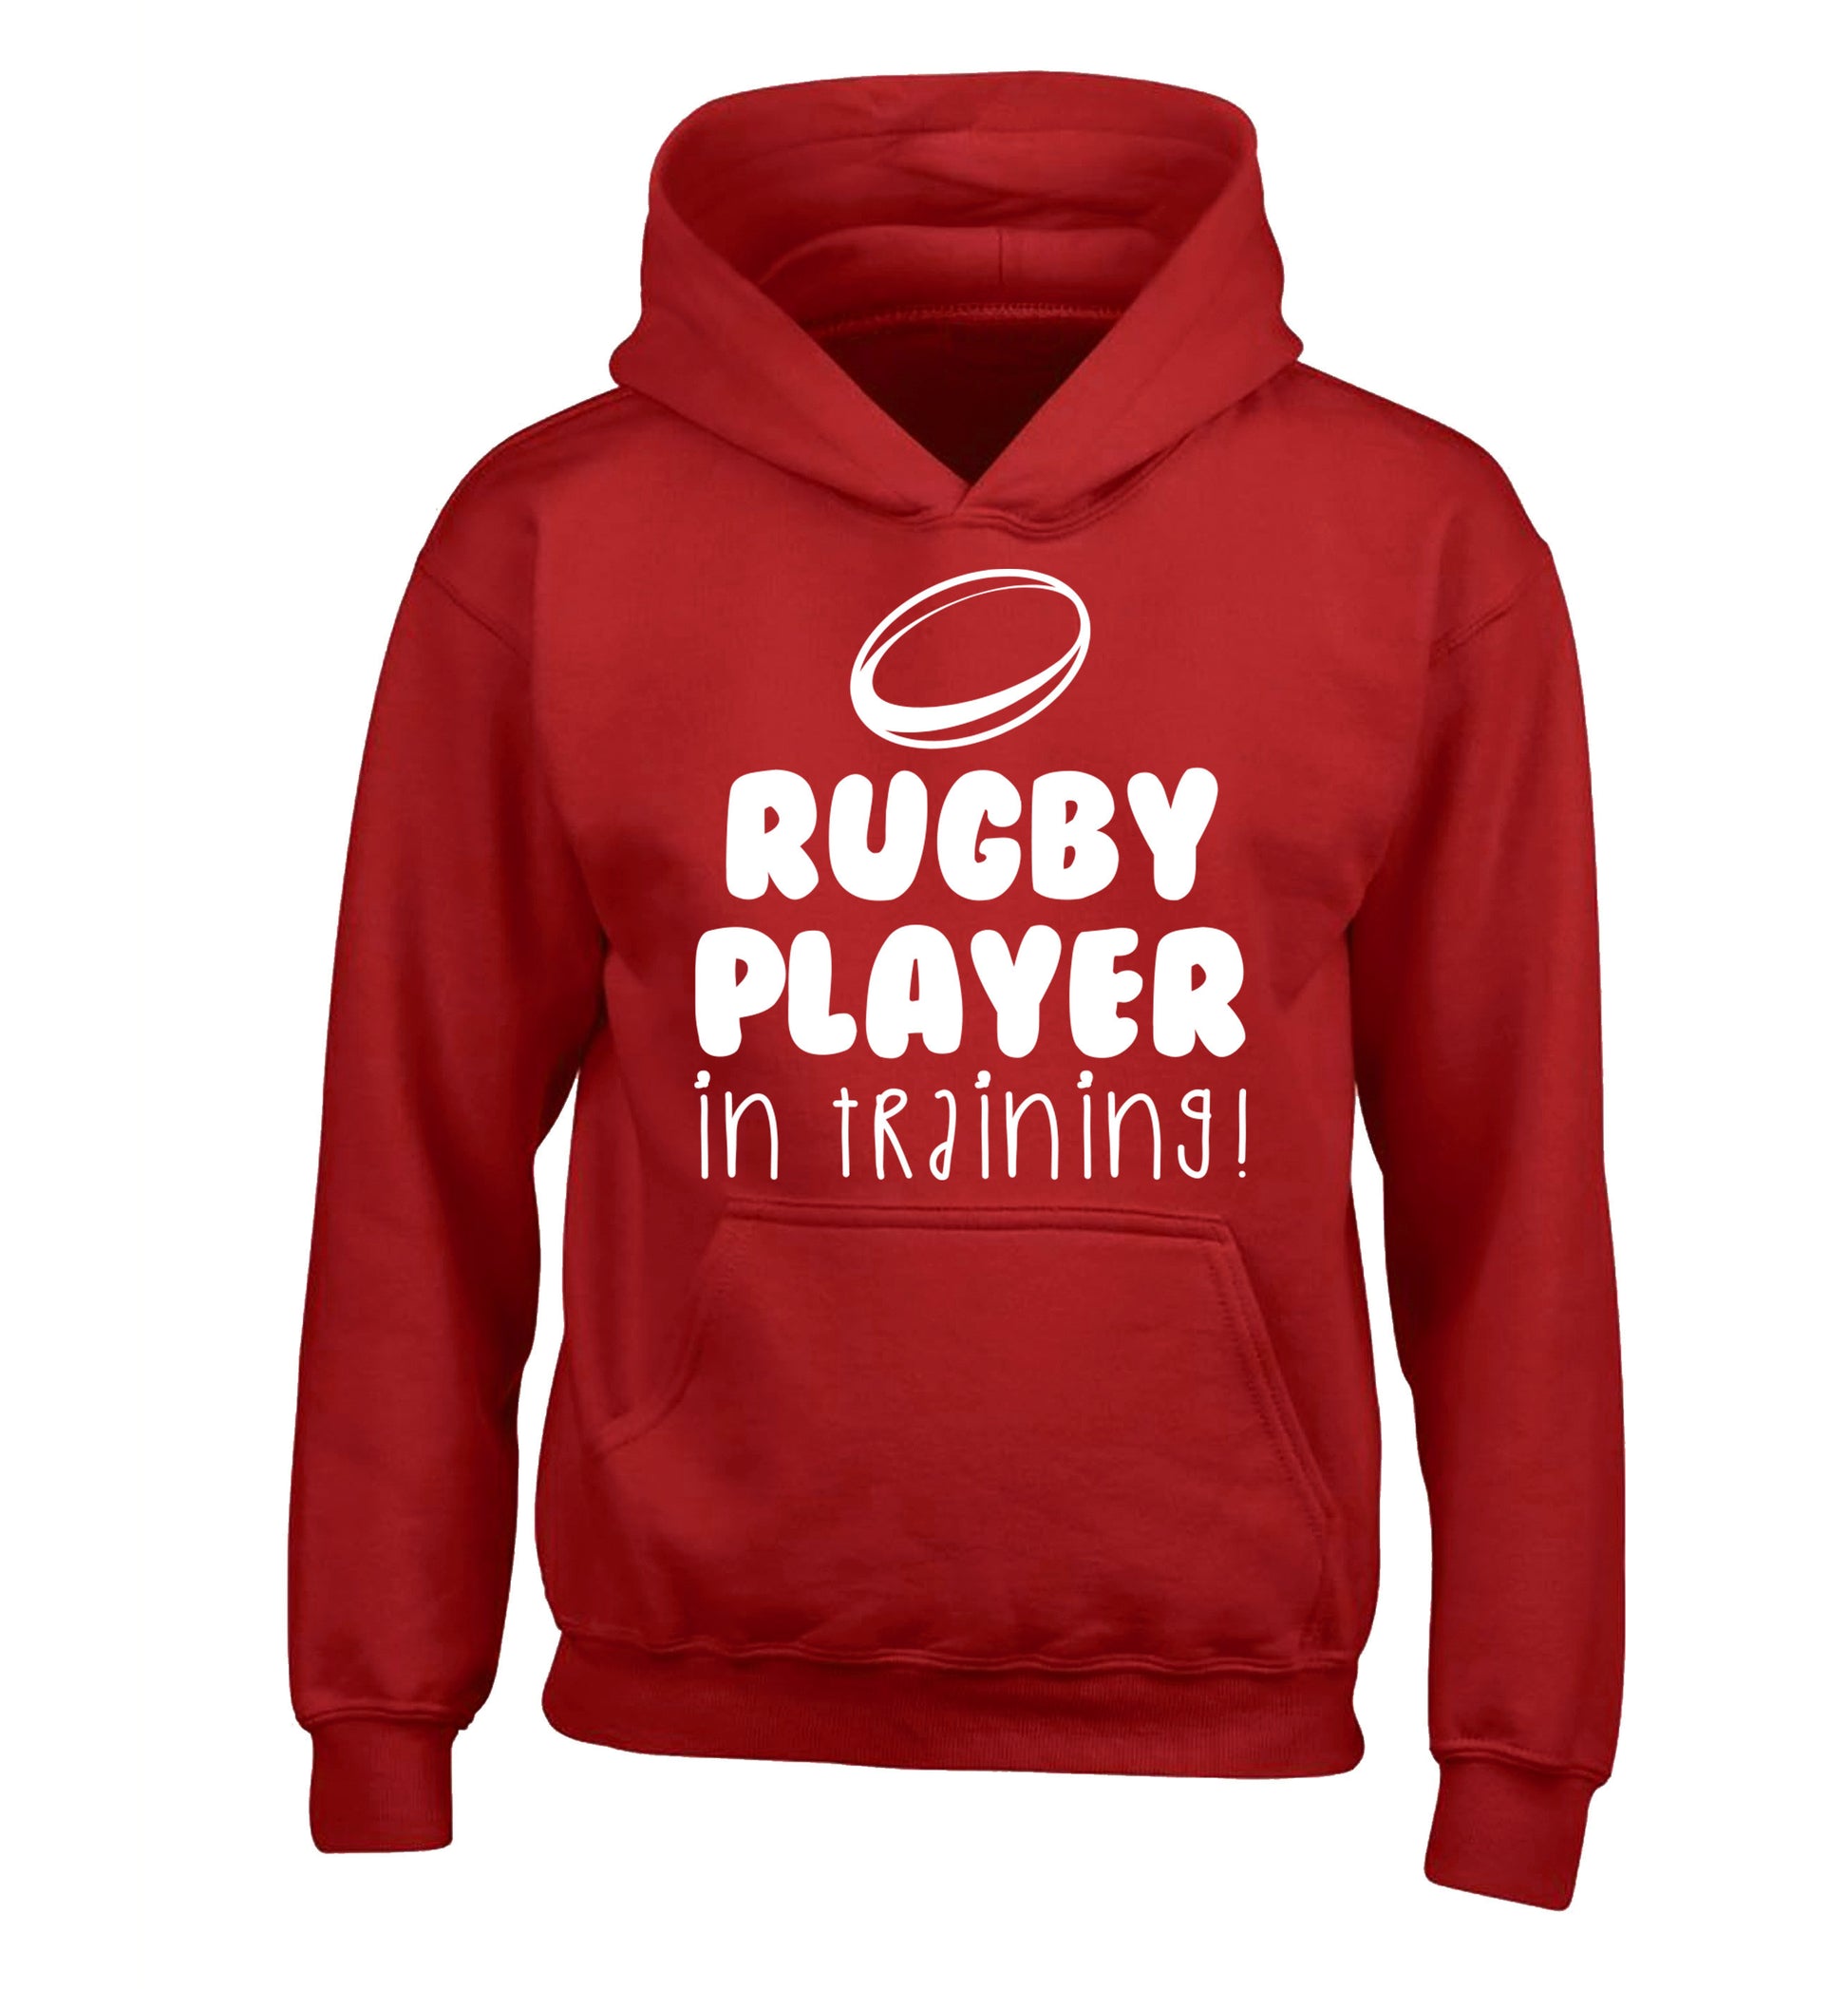 Rugby player in training children's red hoodie 12-14 Years